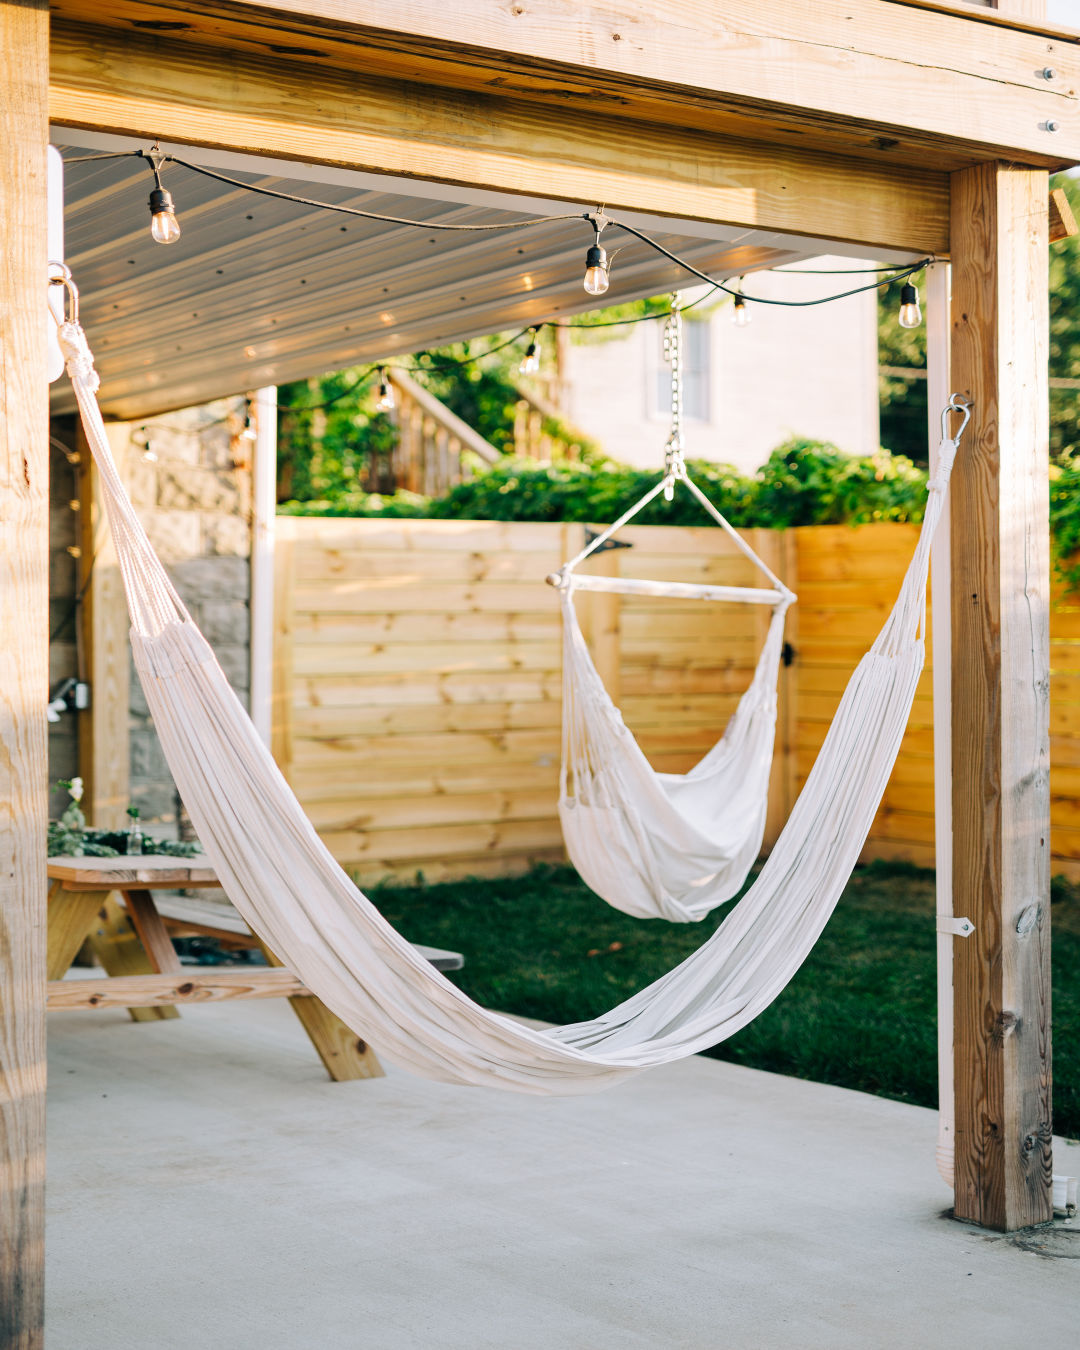 Two hammocks hung from the ceiling of a backyard patio. Photo by Instagram user @scotthansenrealtygroup